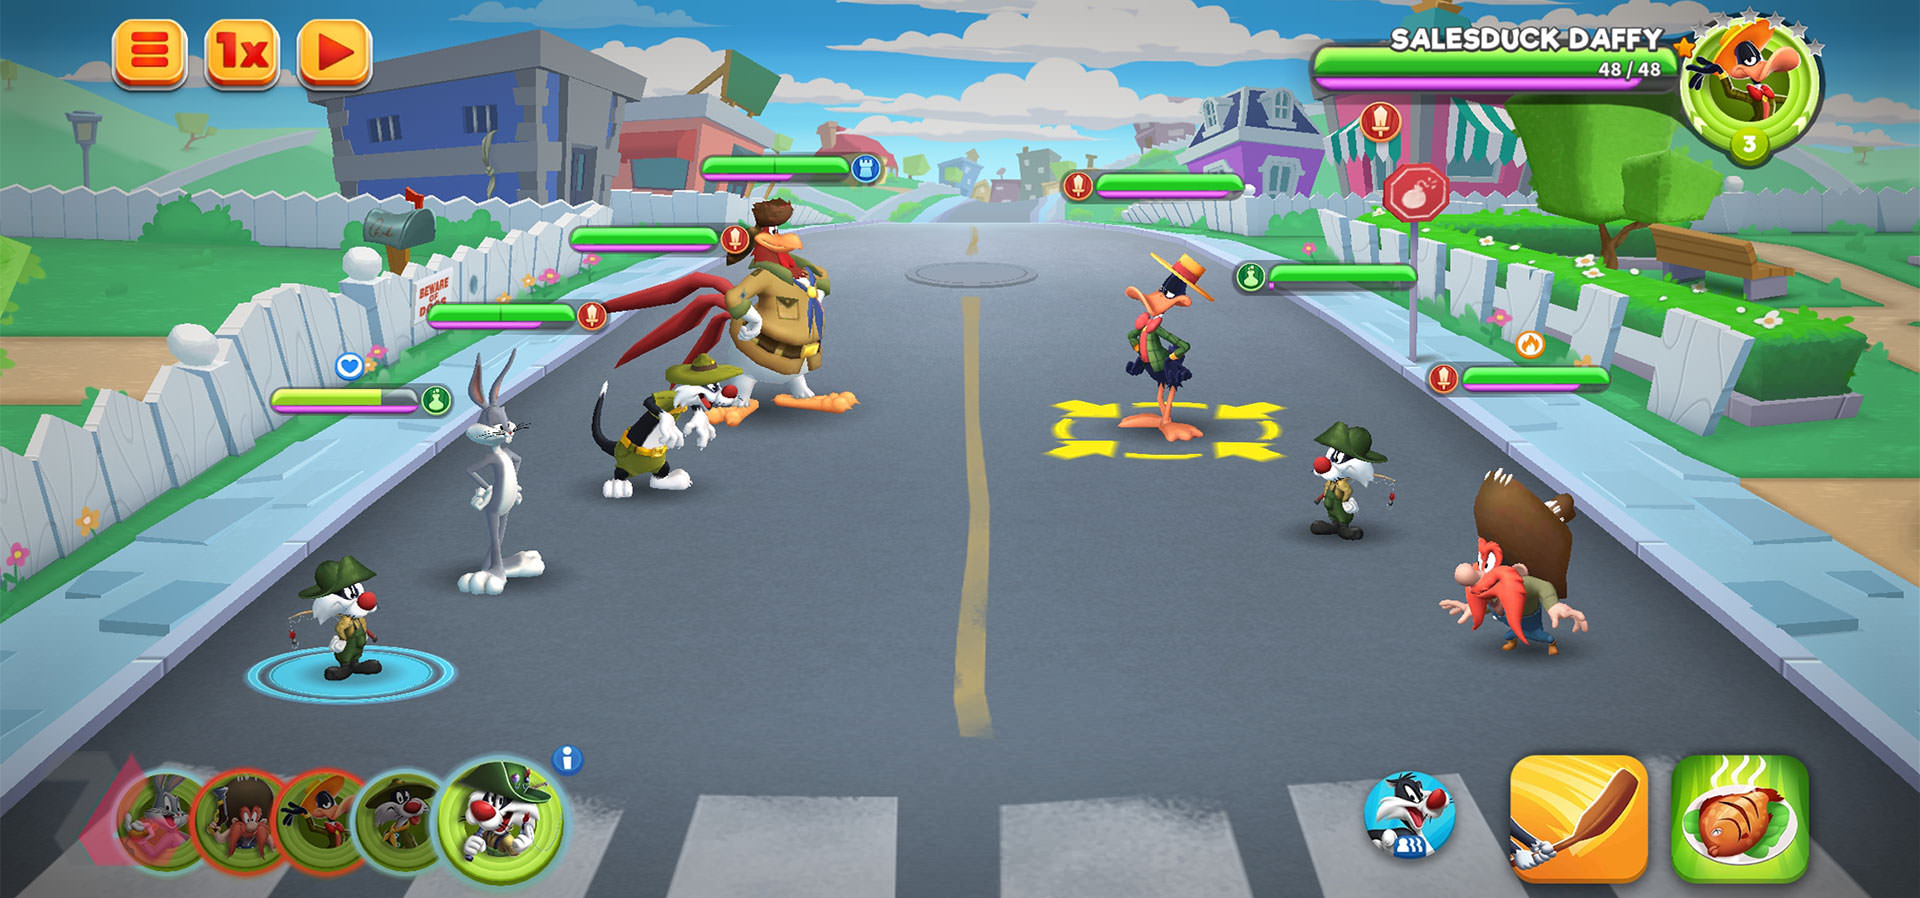 Bugs Bunny's battle with Daffy Duck in the Looney Tunes game